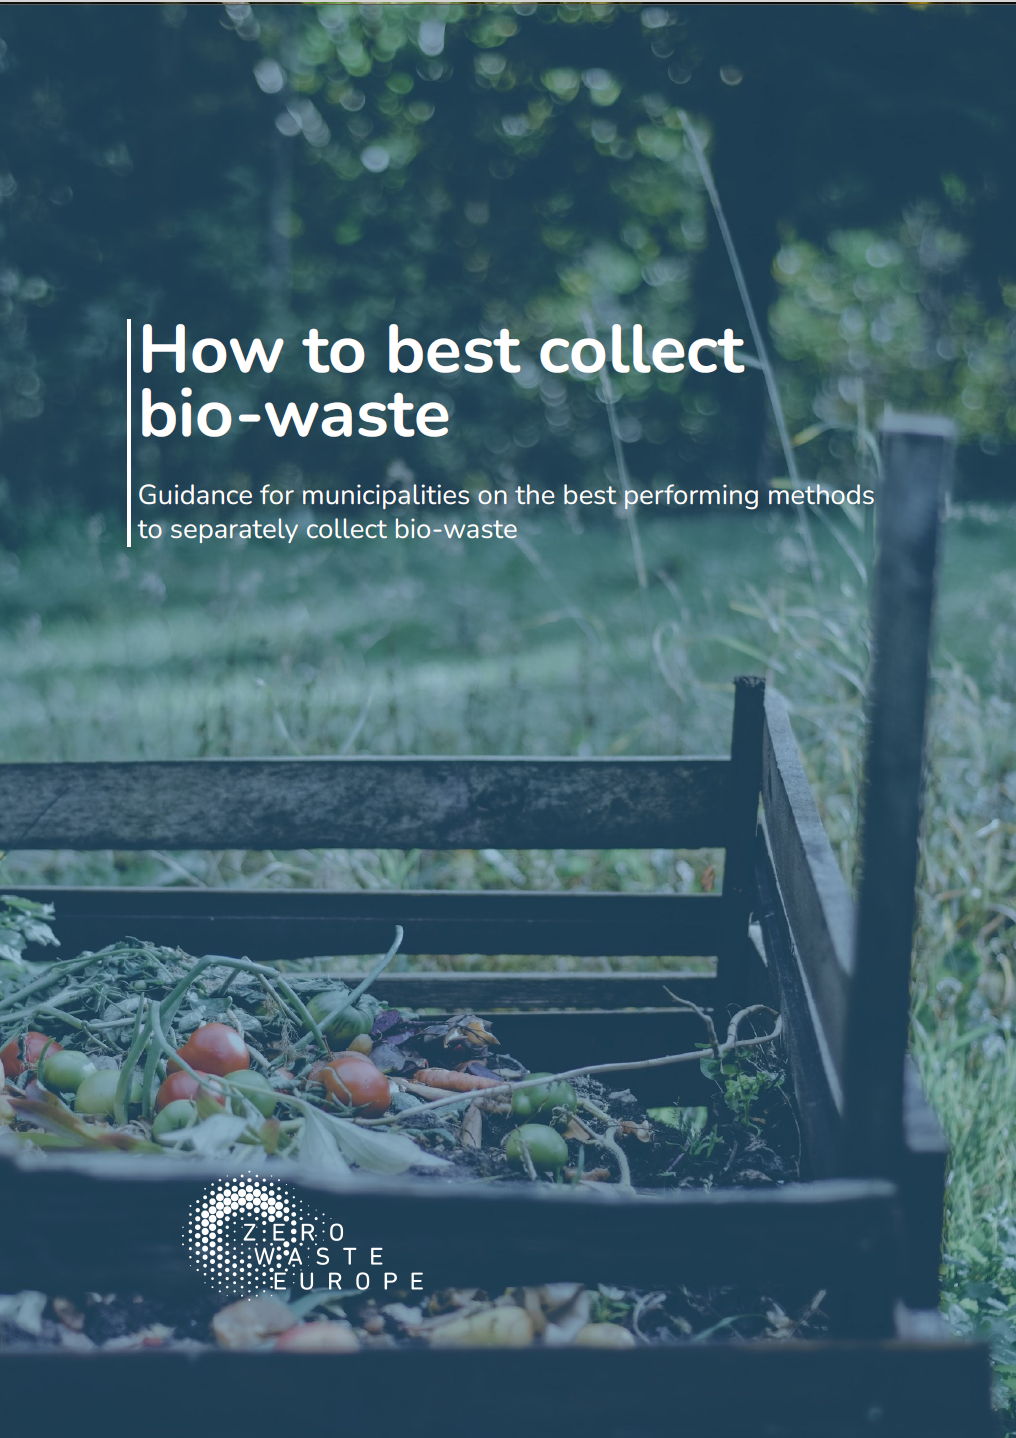 Guidance for municipalities on the best-performing methods to separately collect bio-waste